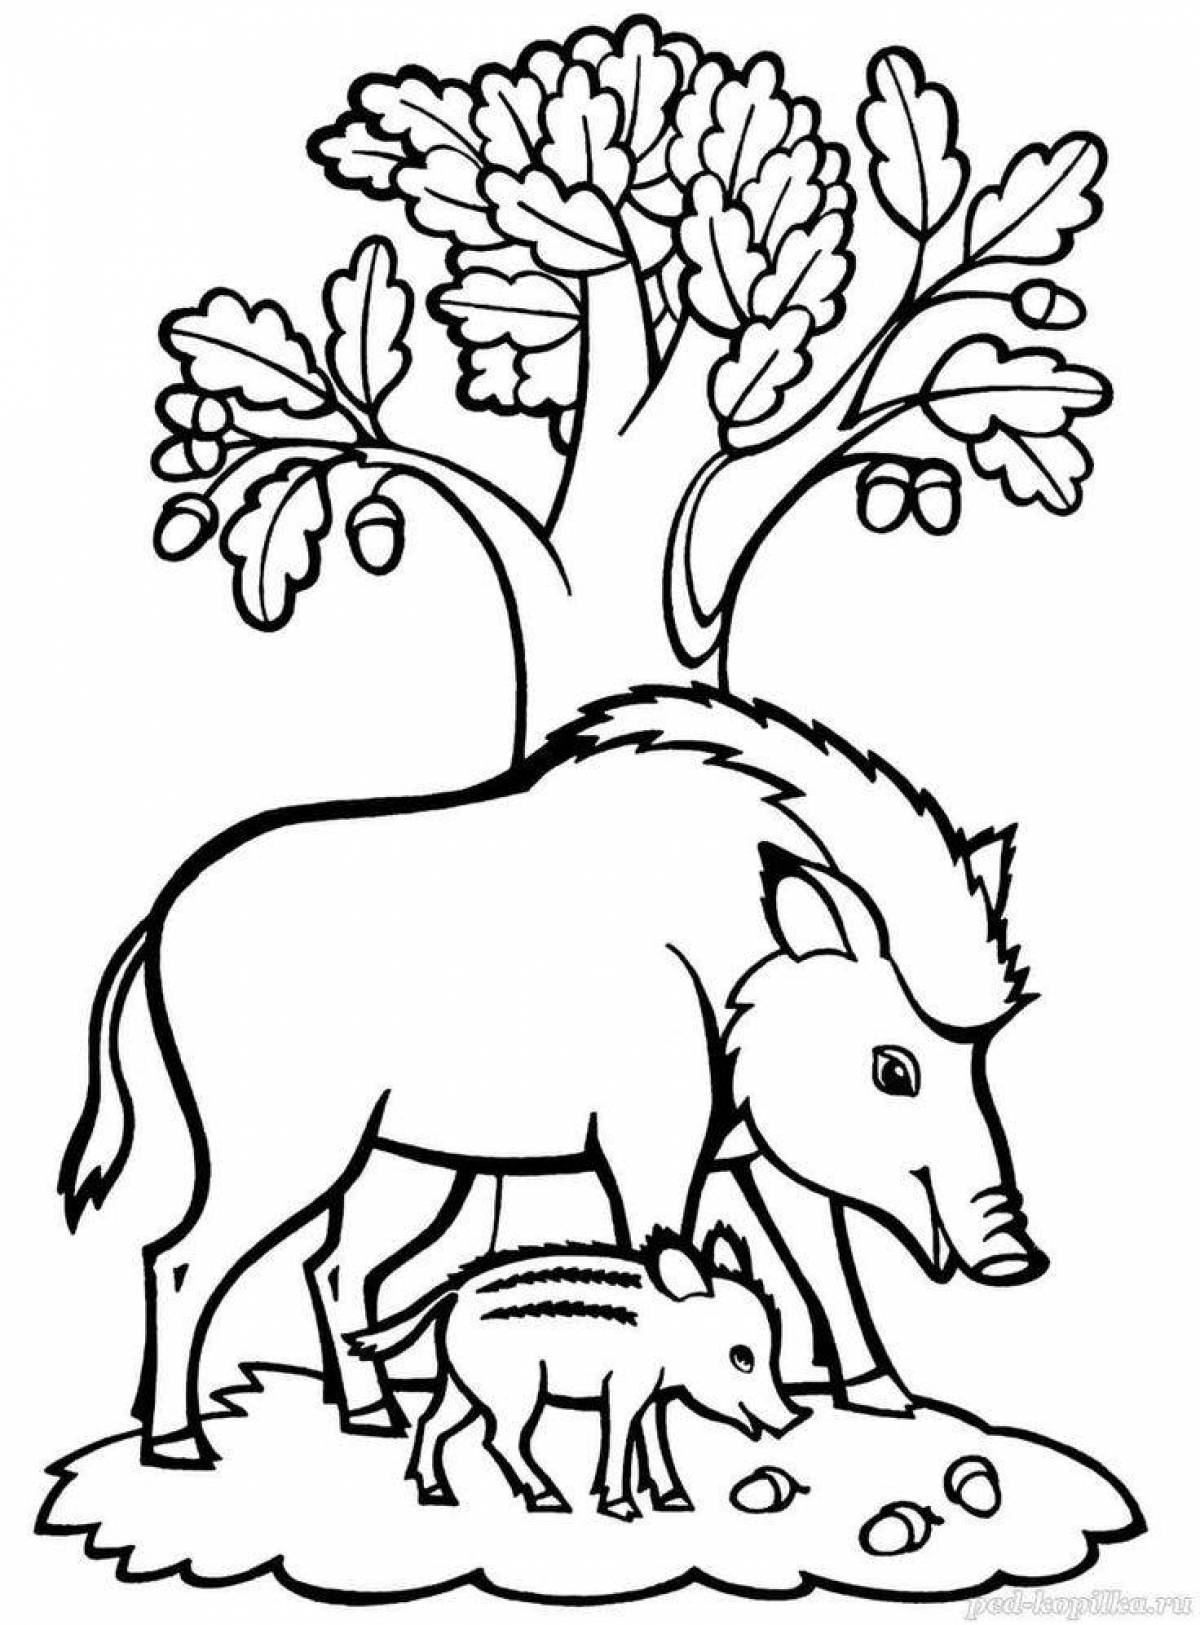 Comic wild animal coloring page